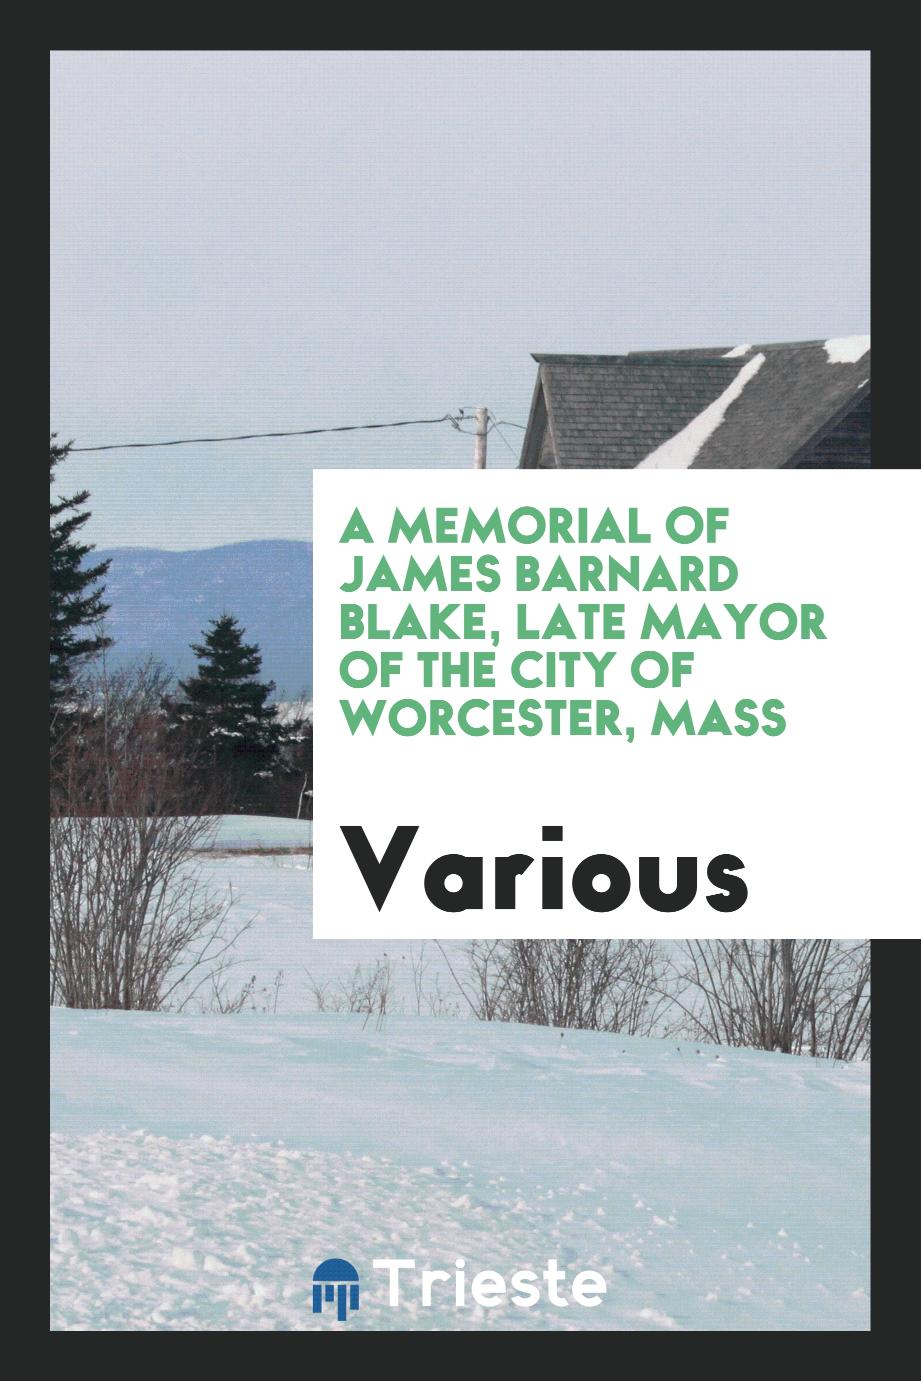 A Memorial of James Barnard Blake, Late Mayor of the City of Worcester, Mass